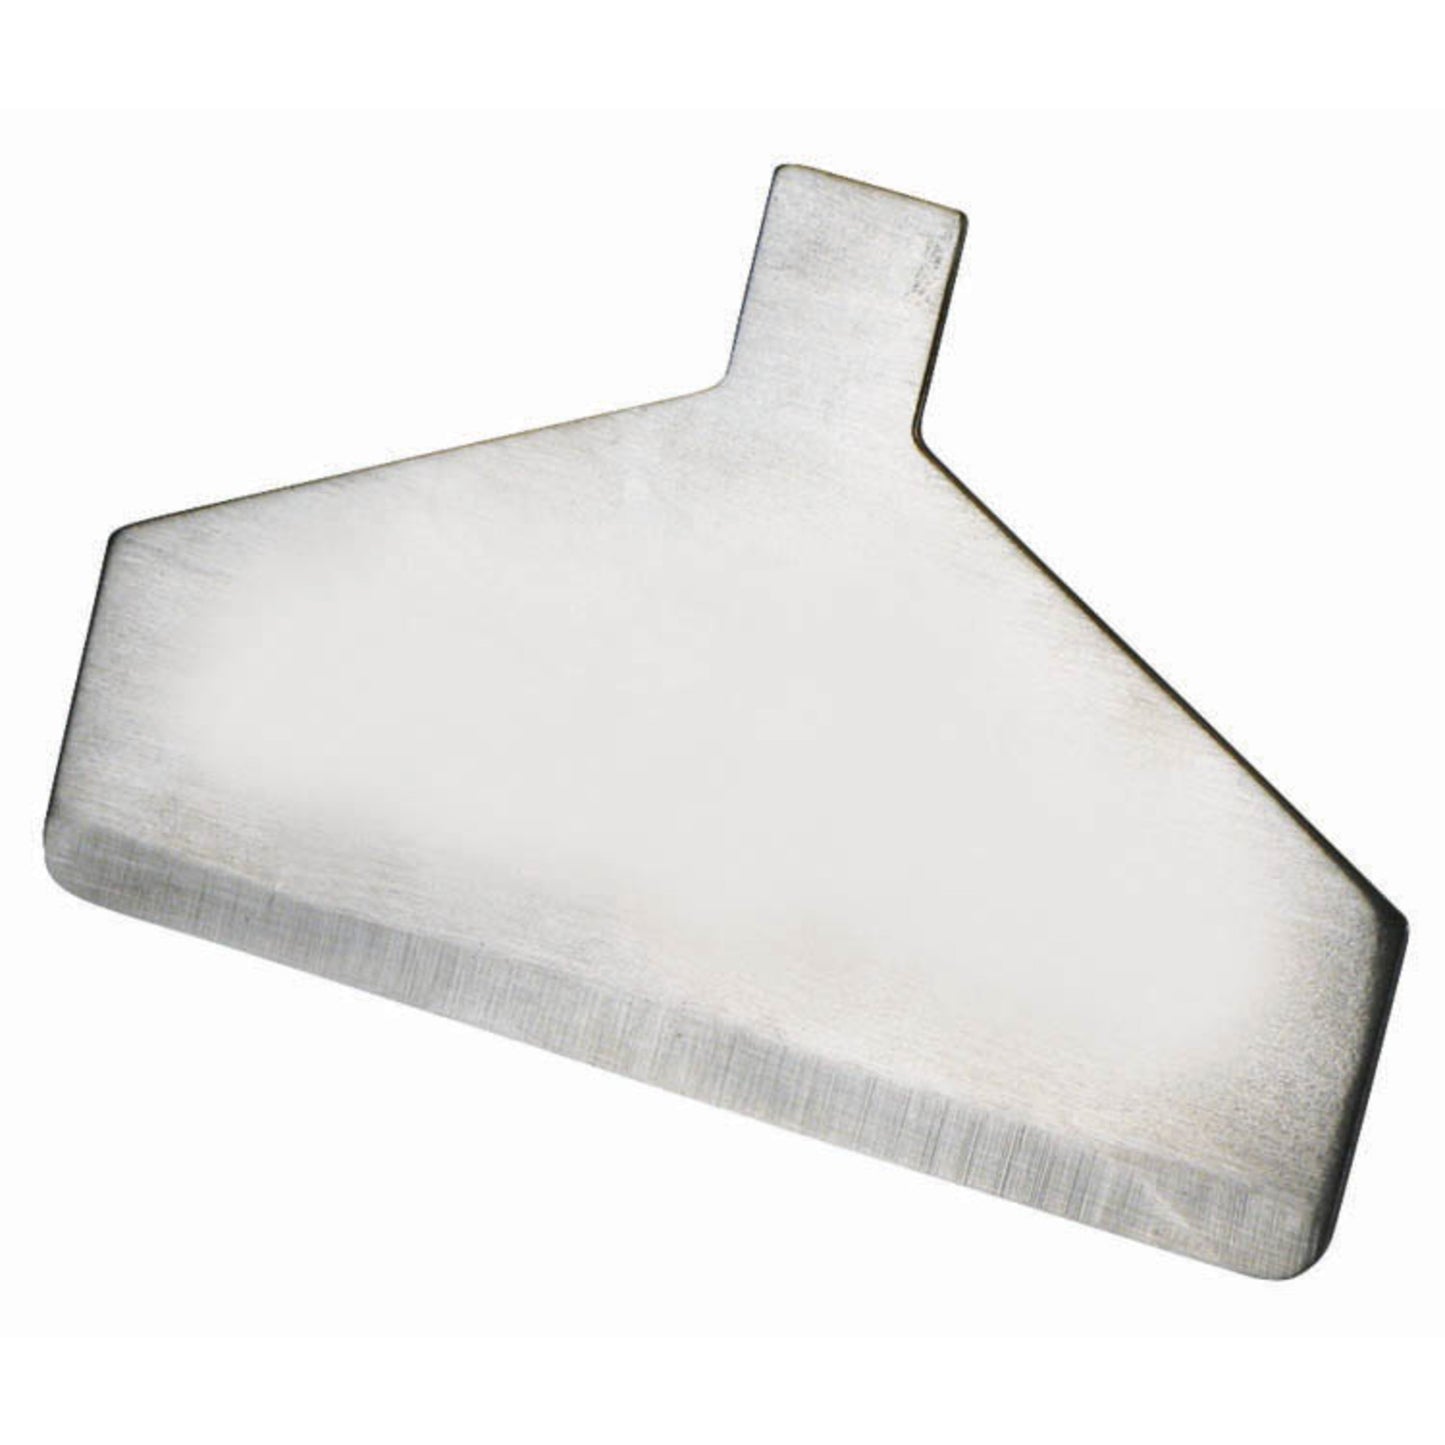 SCRP-5B - Replacement Blade for SCRP-16, 5" Blade